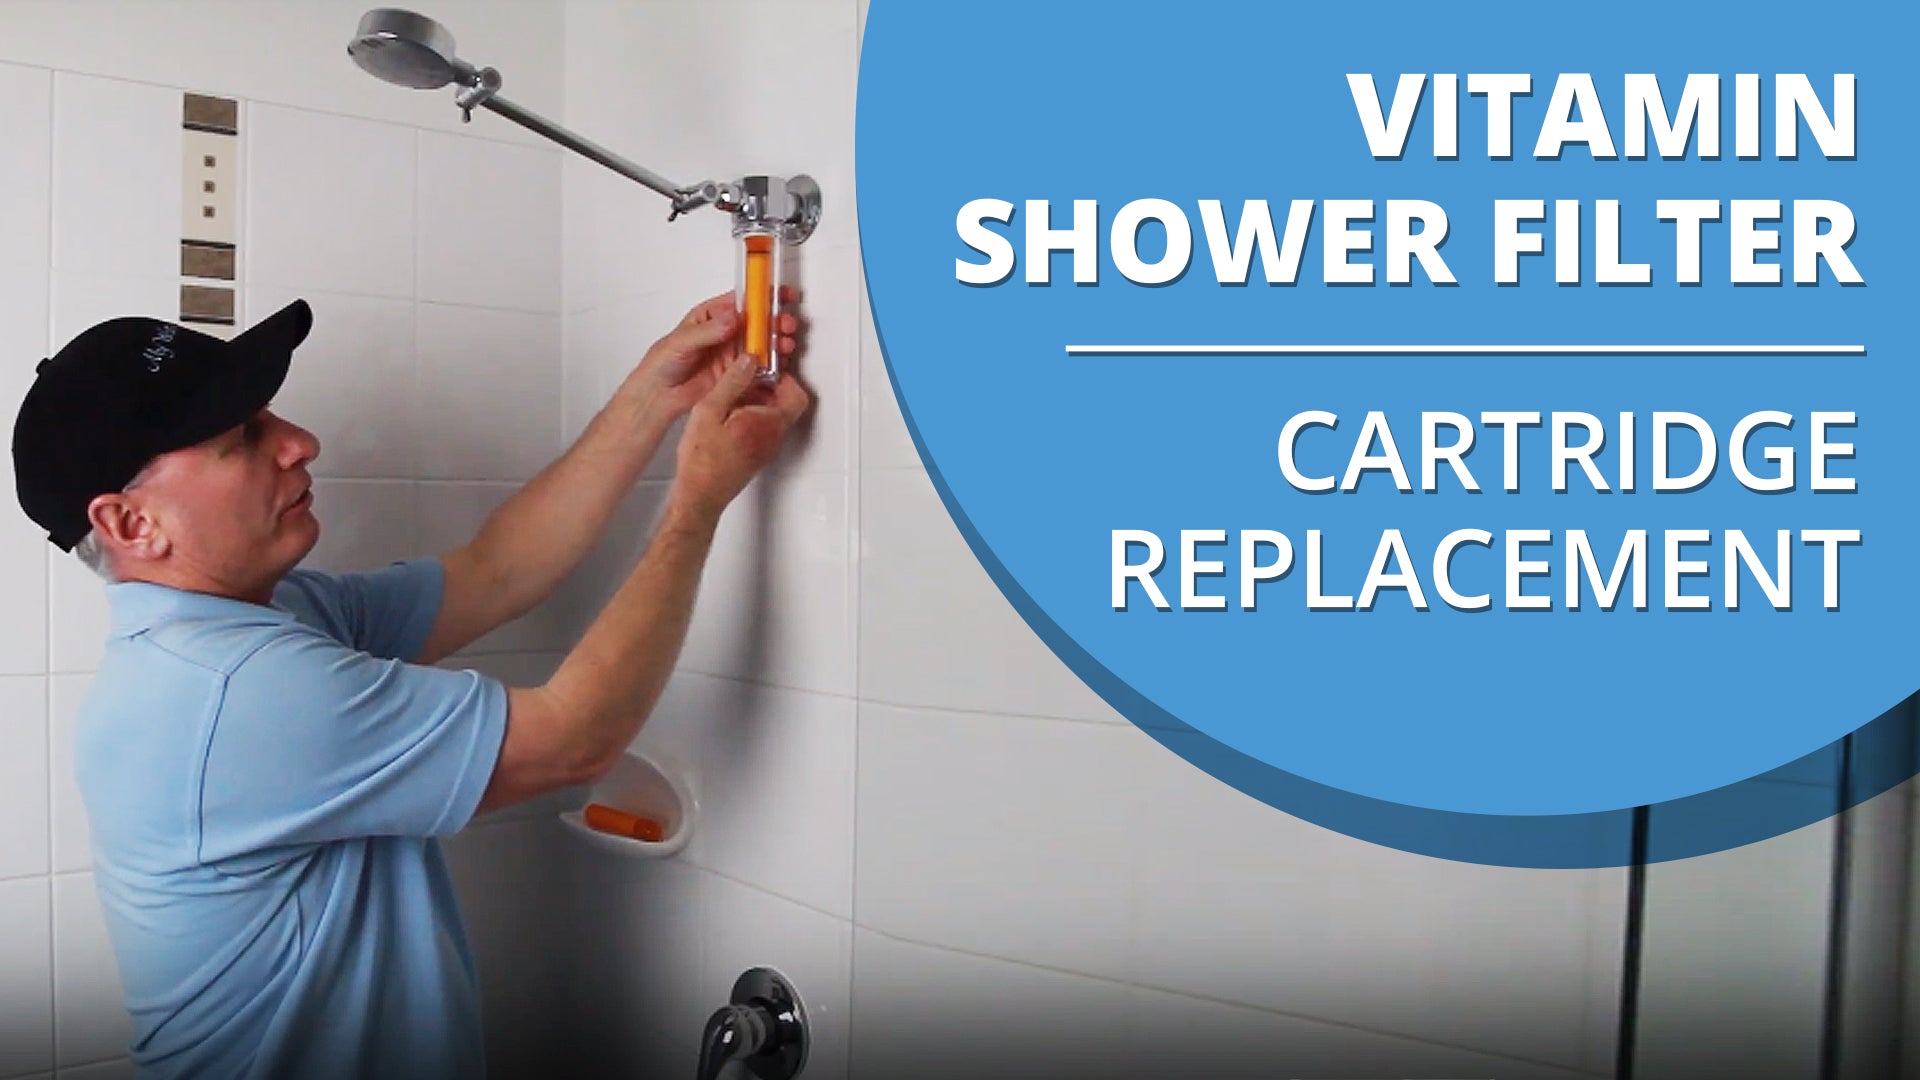 [VIDEO] How to change the cartridge in your Vitamin Shower Water Filter with Longer Lasting Cartridge